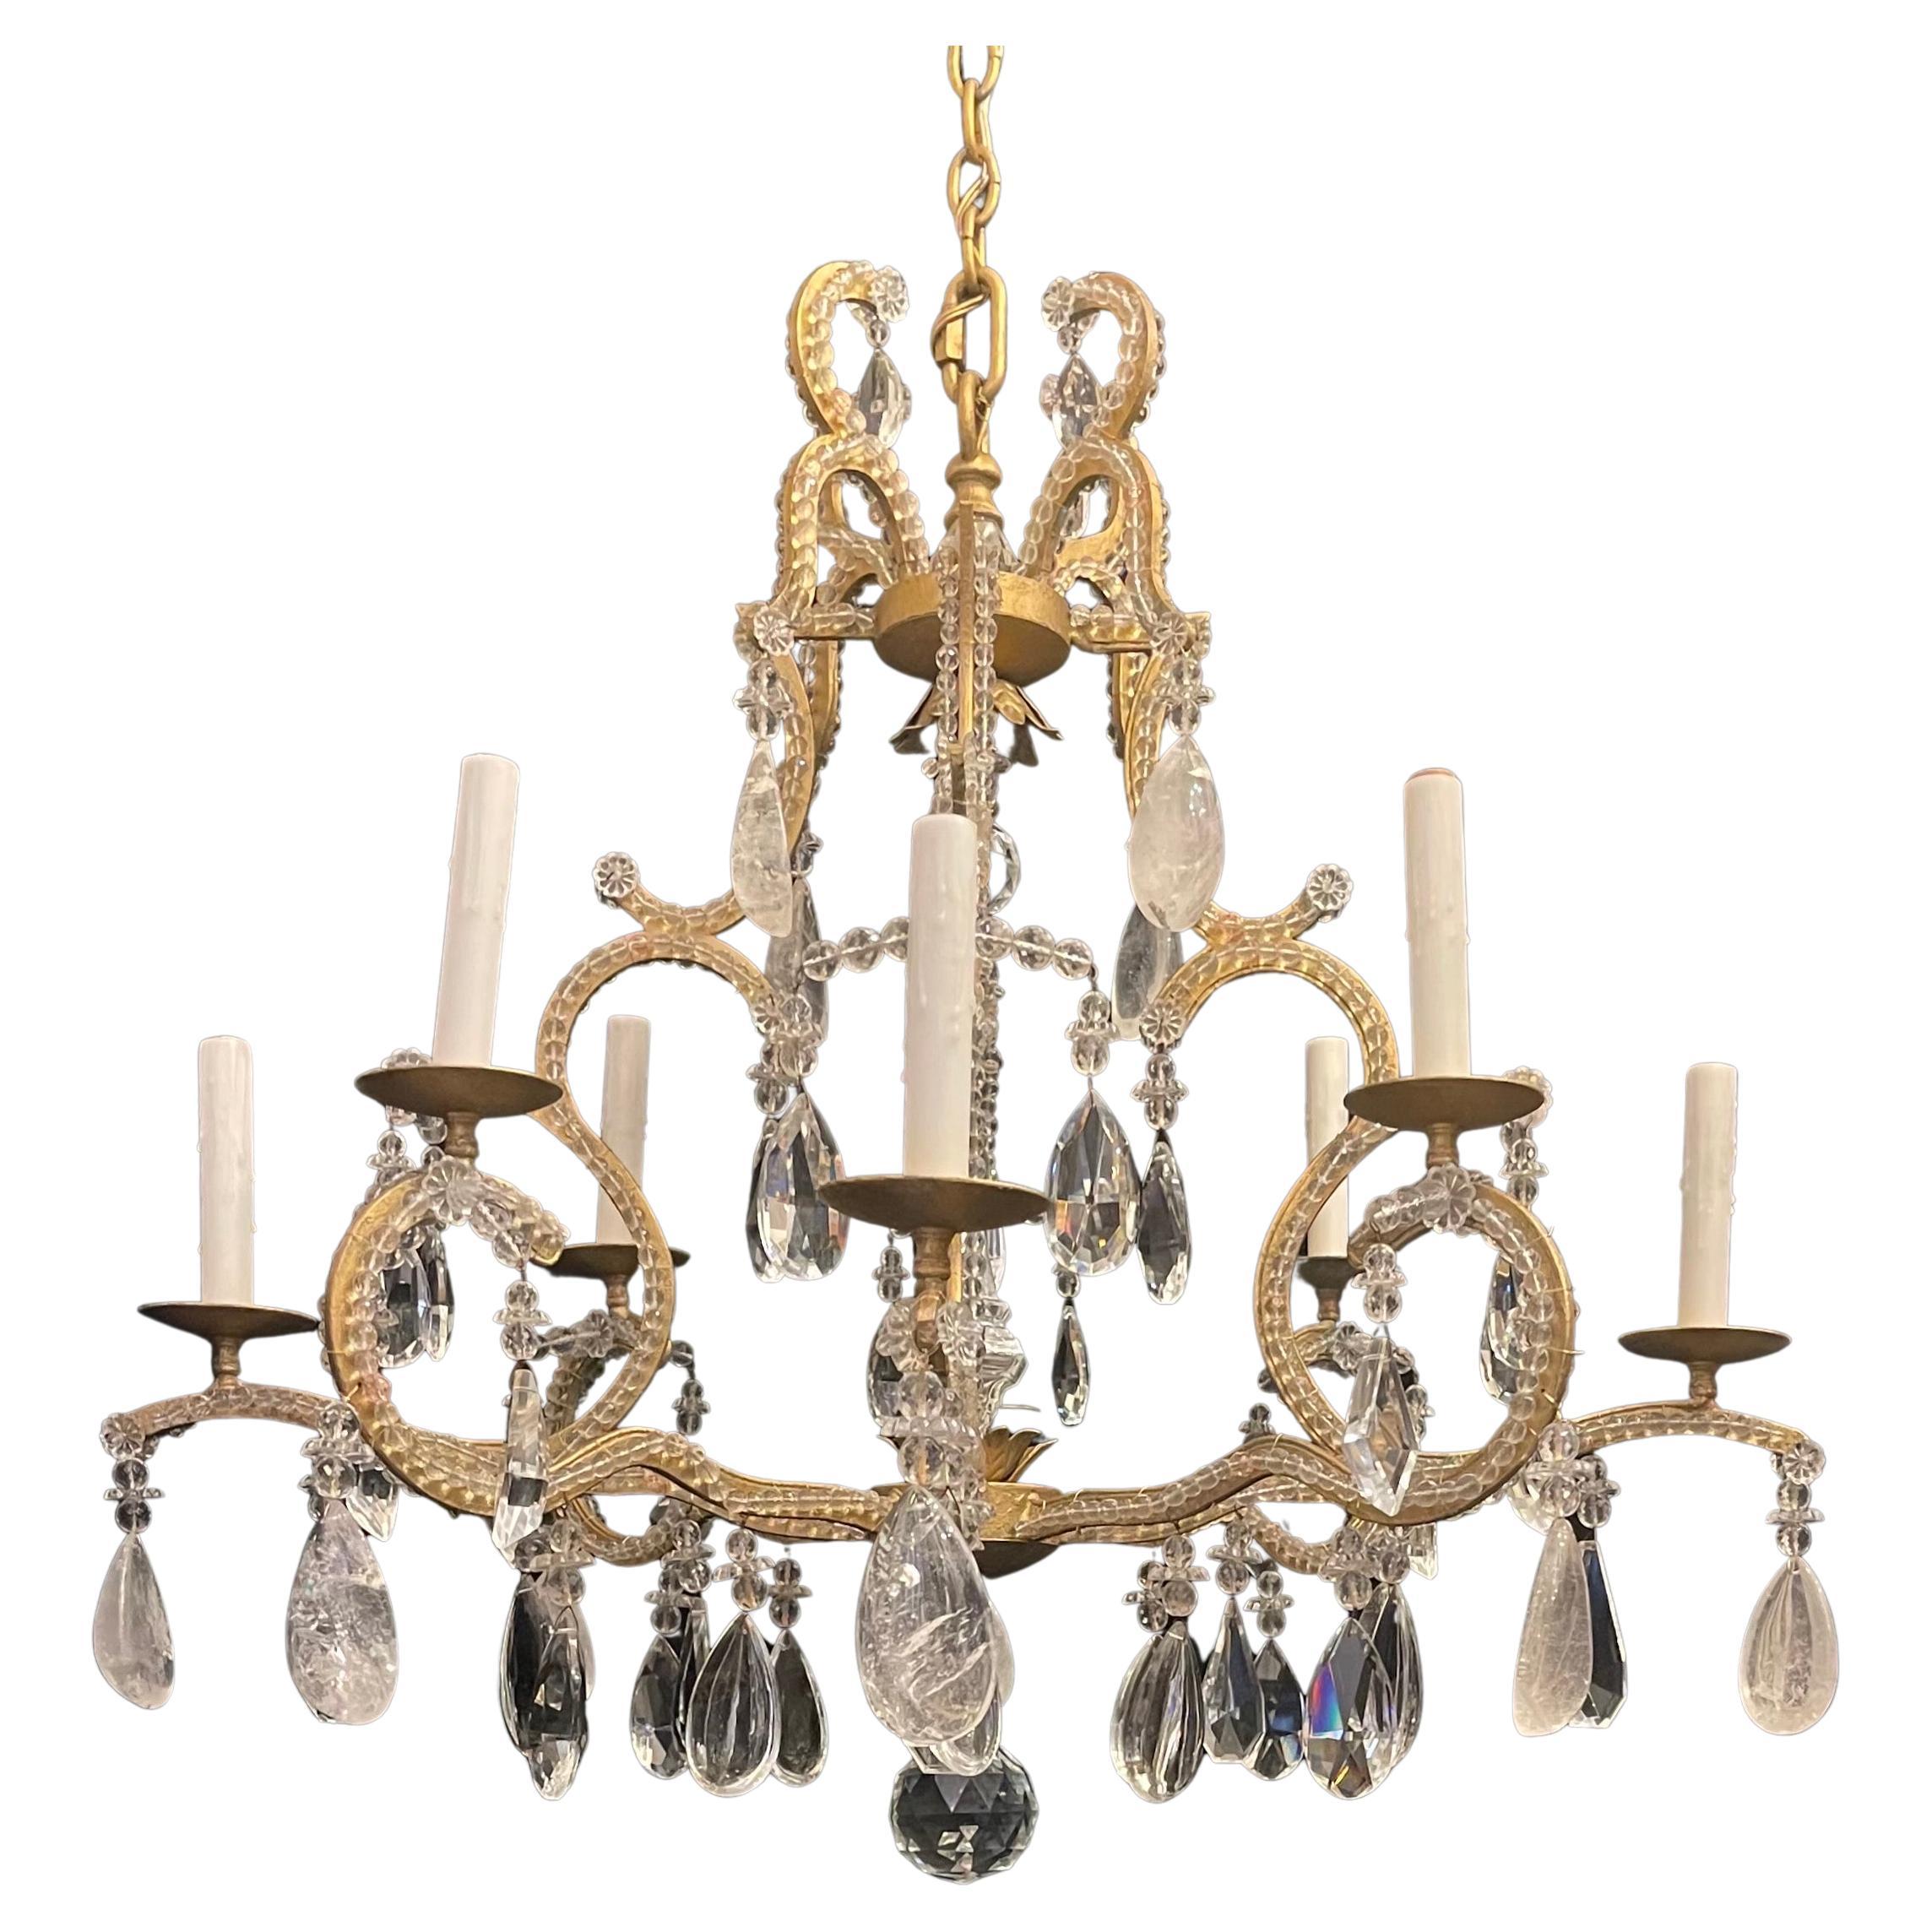 A Wonderful Mid-Century Modern Maison Baguès Style Gold Gilt With Beaded Arms And Flowers Leading To Rock Crystal Drops Large 8 Candelabra Light Chandelier.